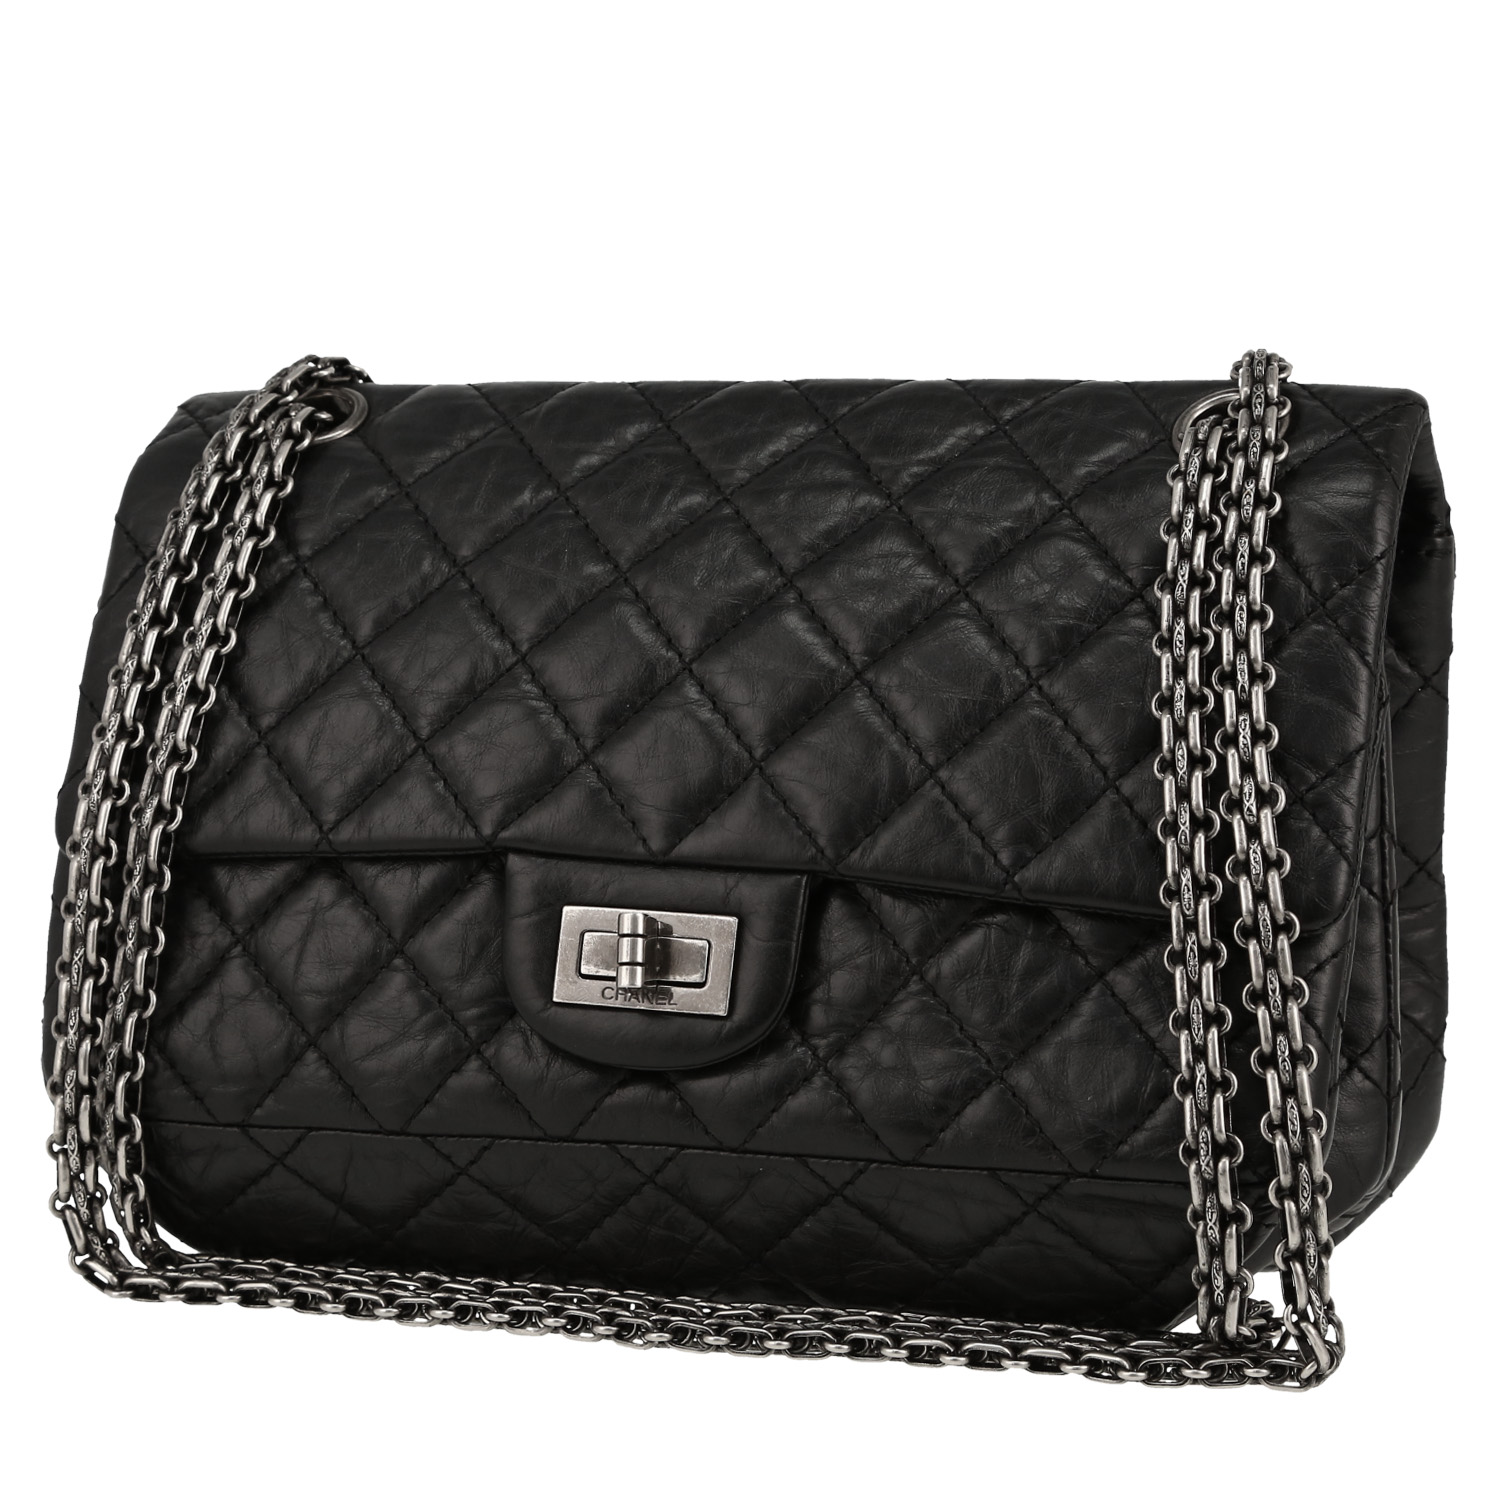 Cra-wallonieShops, Mulberry small Darley chain strap bag